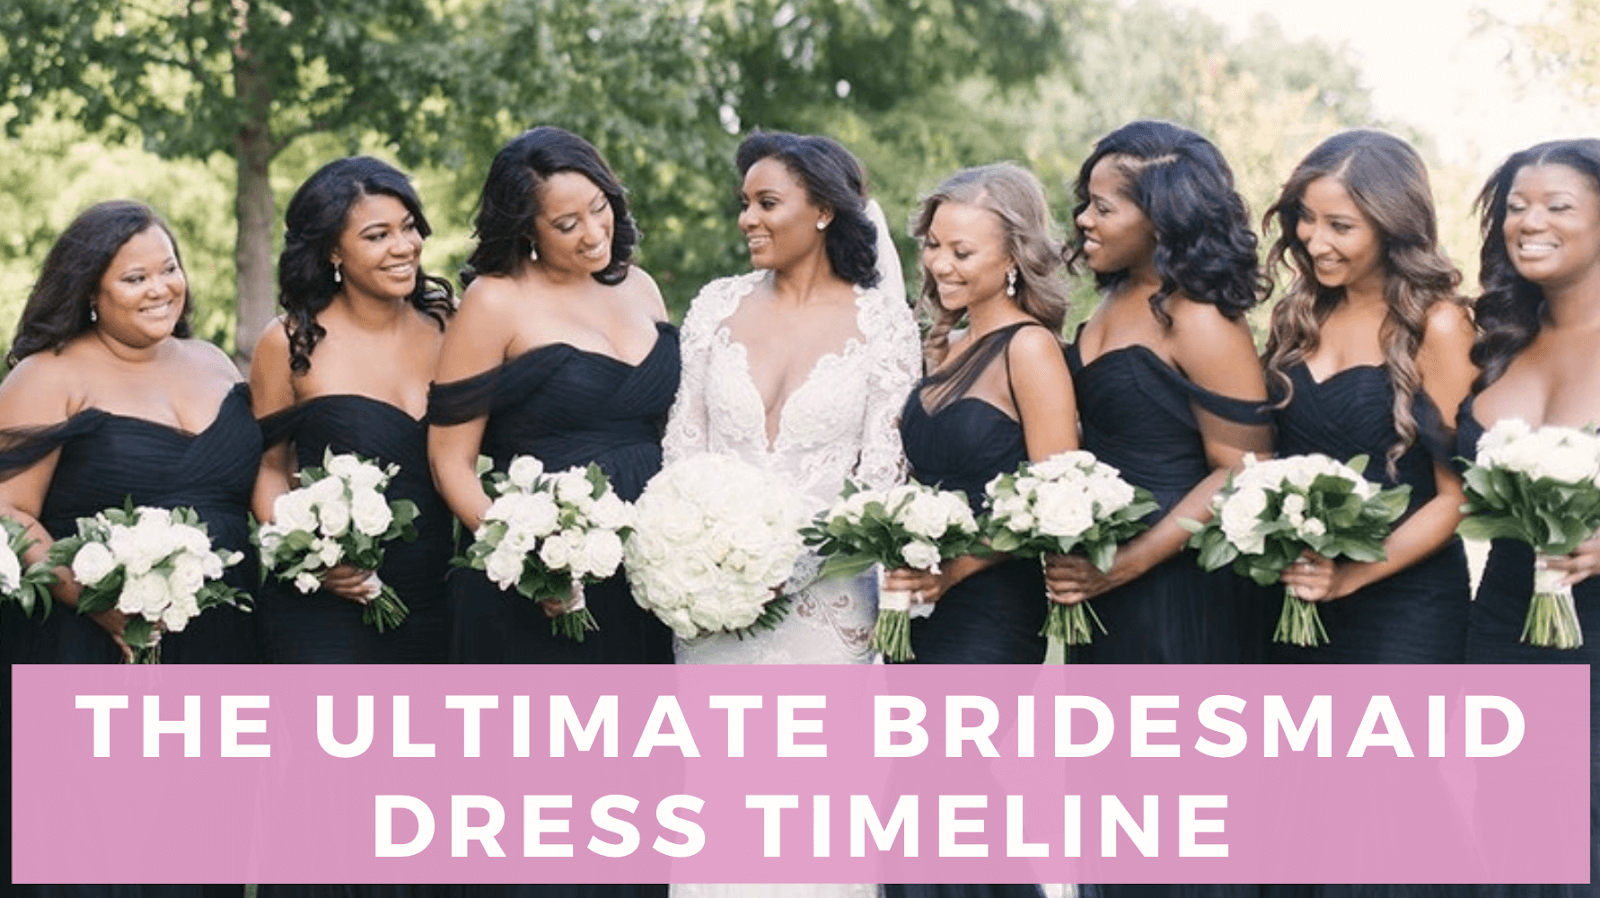 Every Bridal Party Question You've Ever Had, Answered